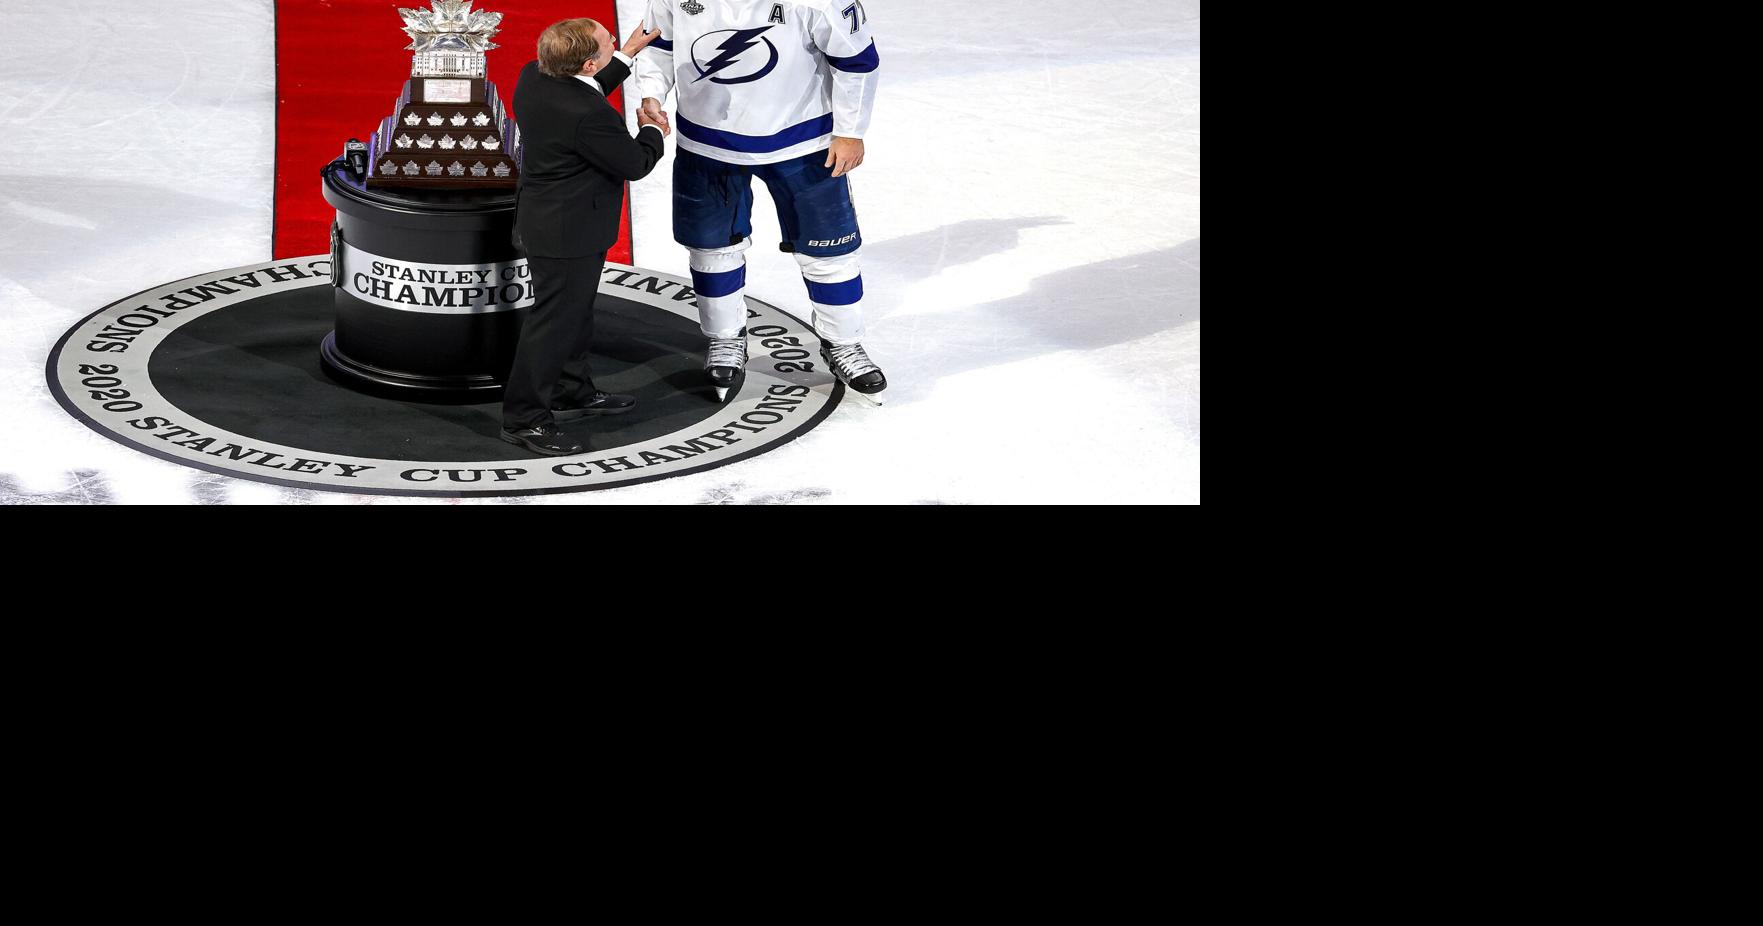 2022 NHL All Star Game Banner Featuring Victor Hedman (Tampa Bay